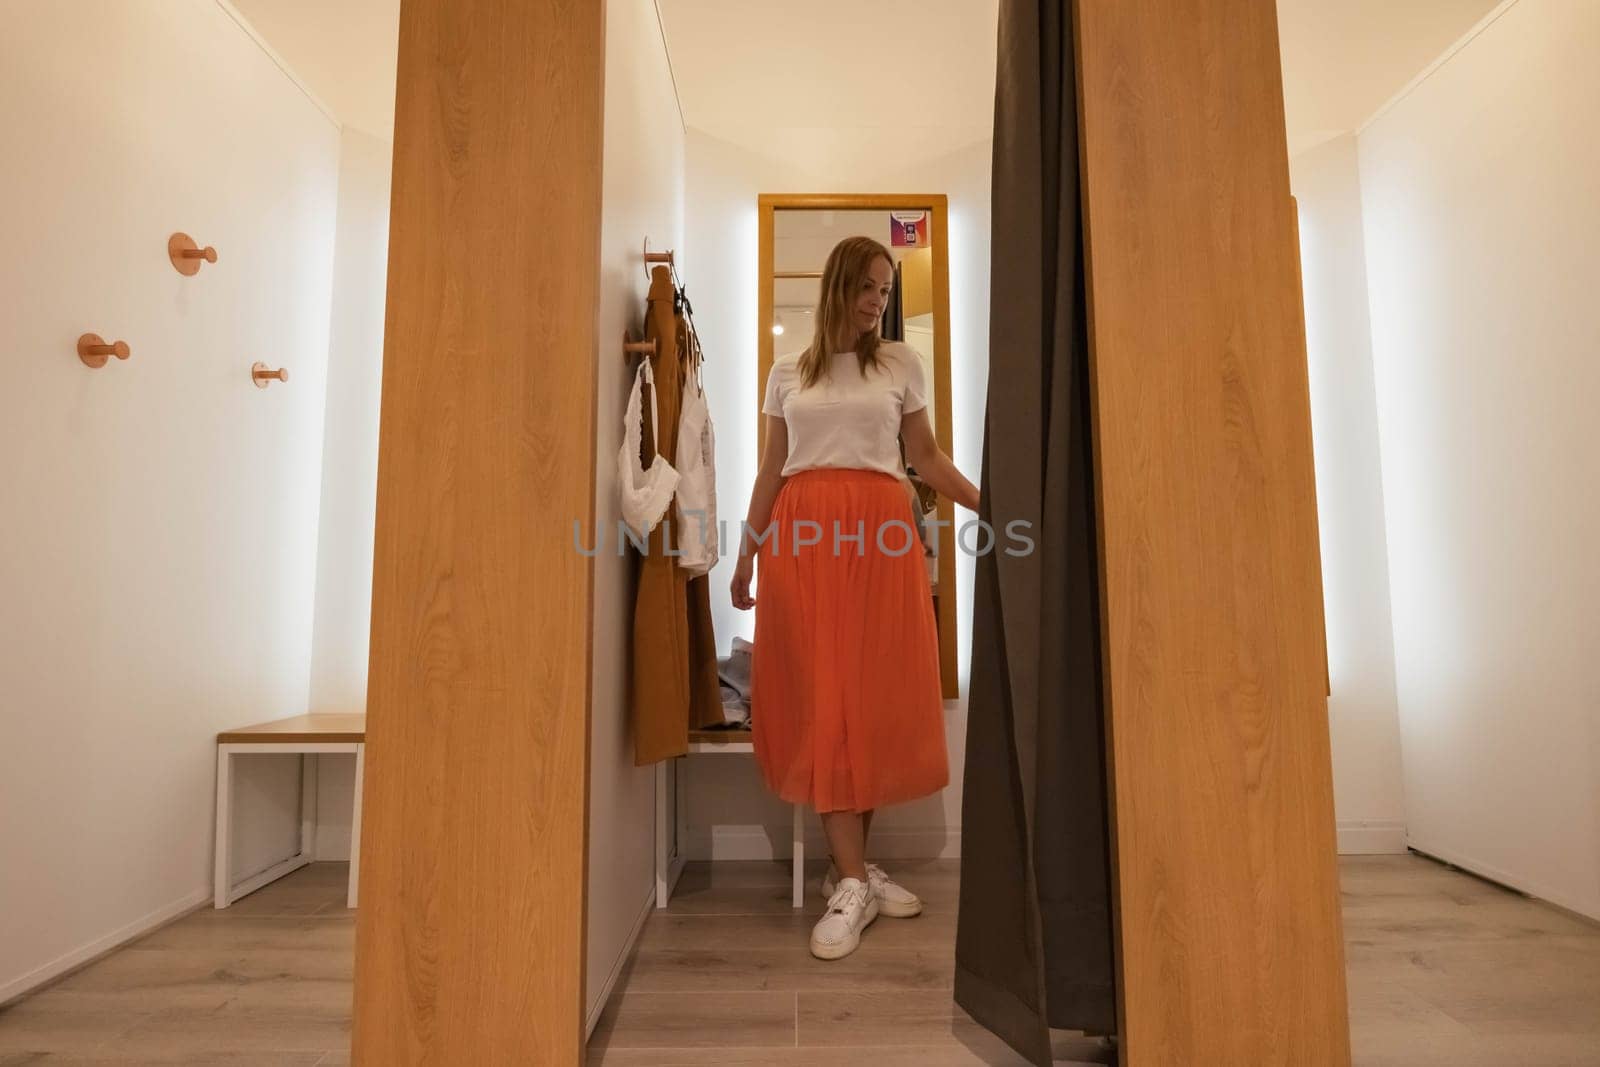 a girl trying on a white t-shirt and an orange skirt in a booth looks in the mirror. brown and white fitting booths in a things store. there is a place for an inscription. High quality photo